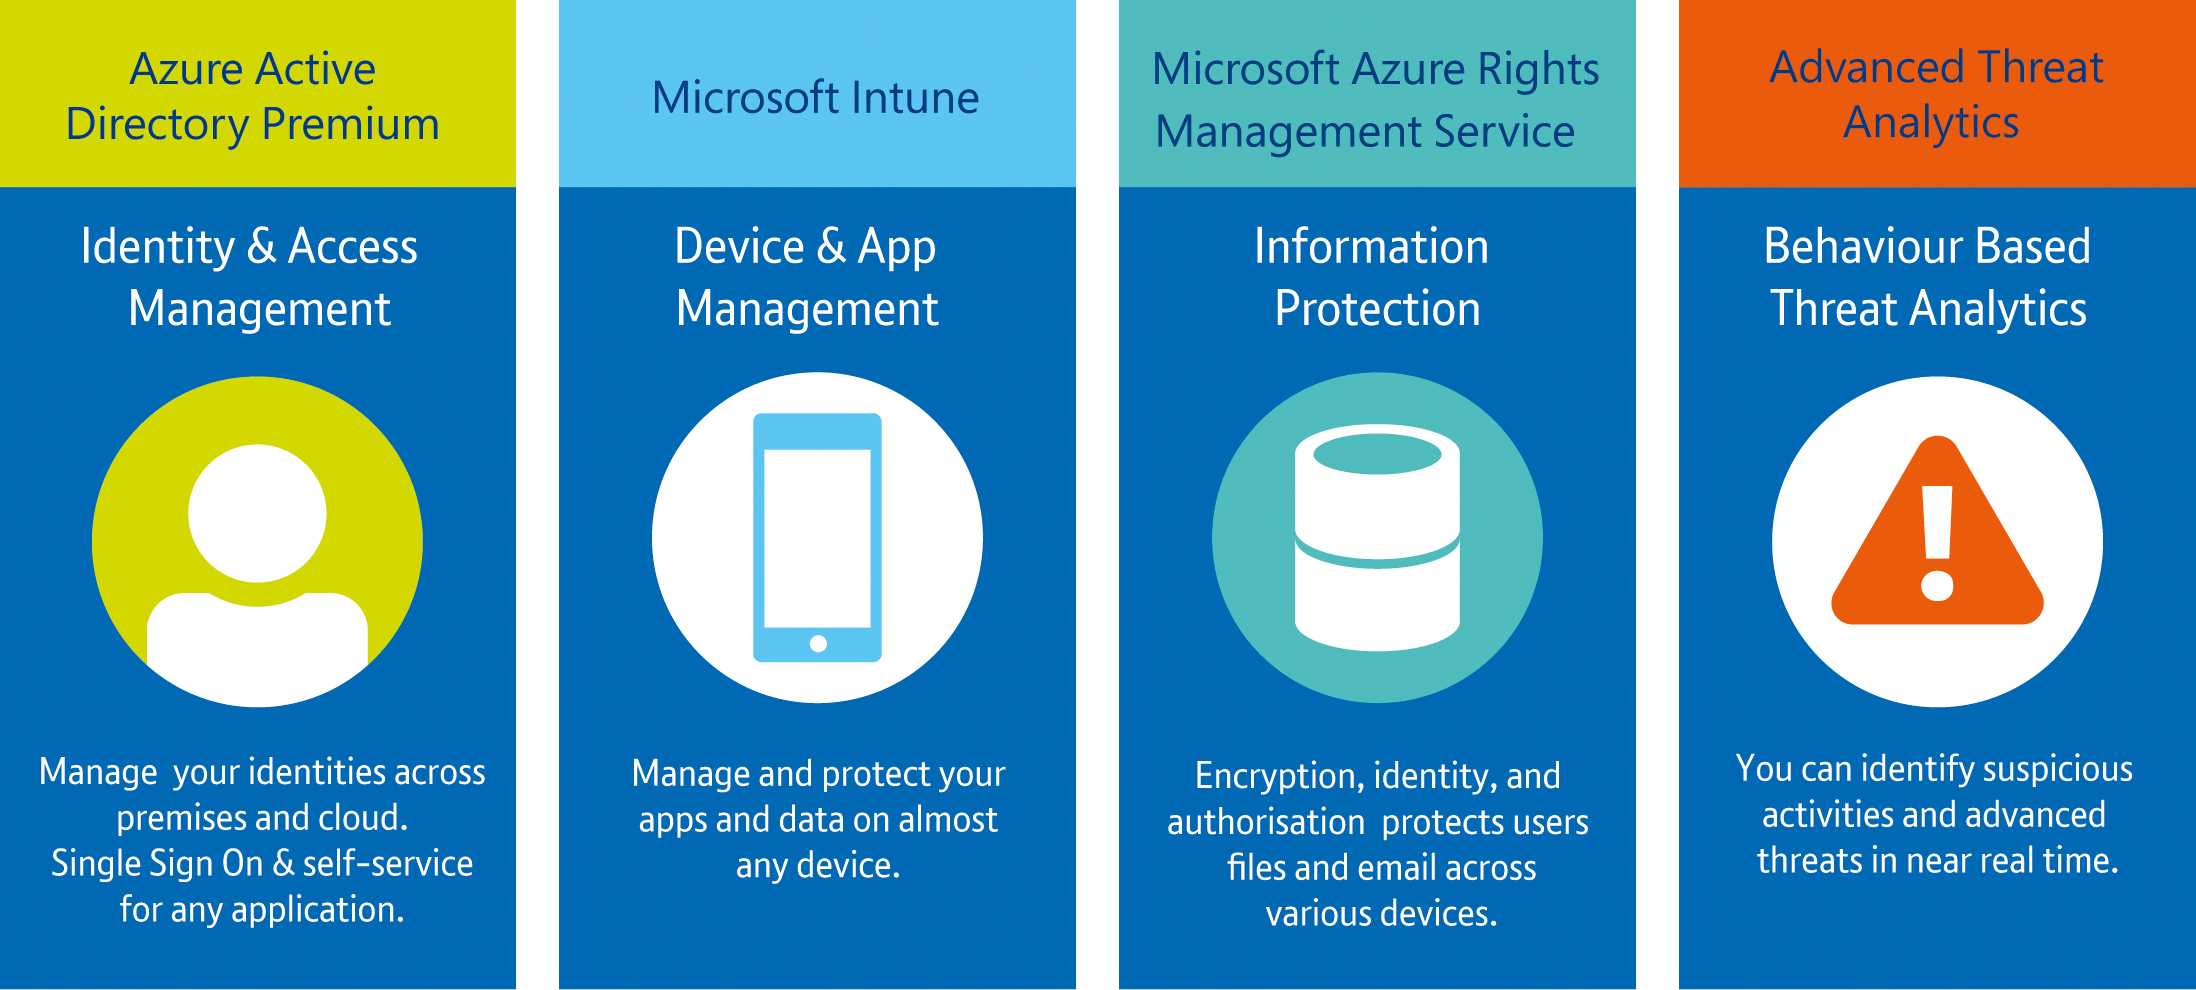 What is microsoft’s enterprise mobility suite